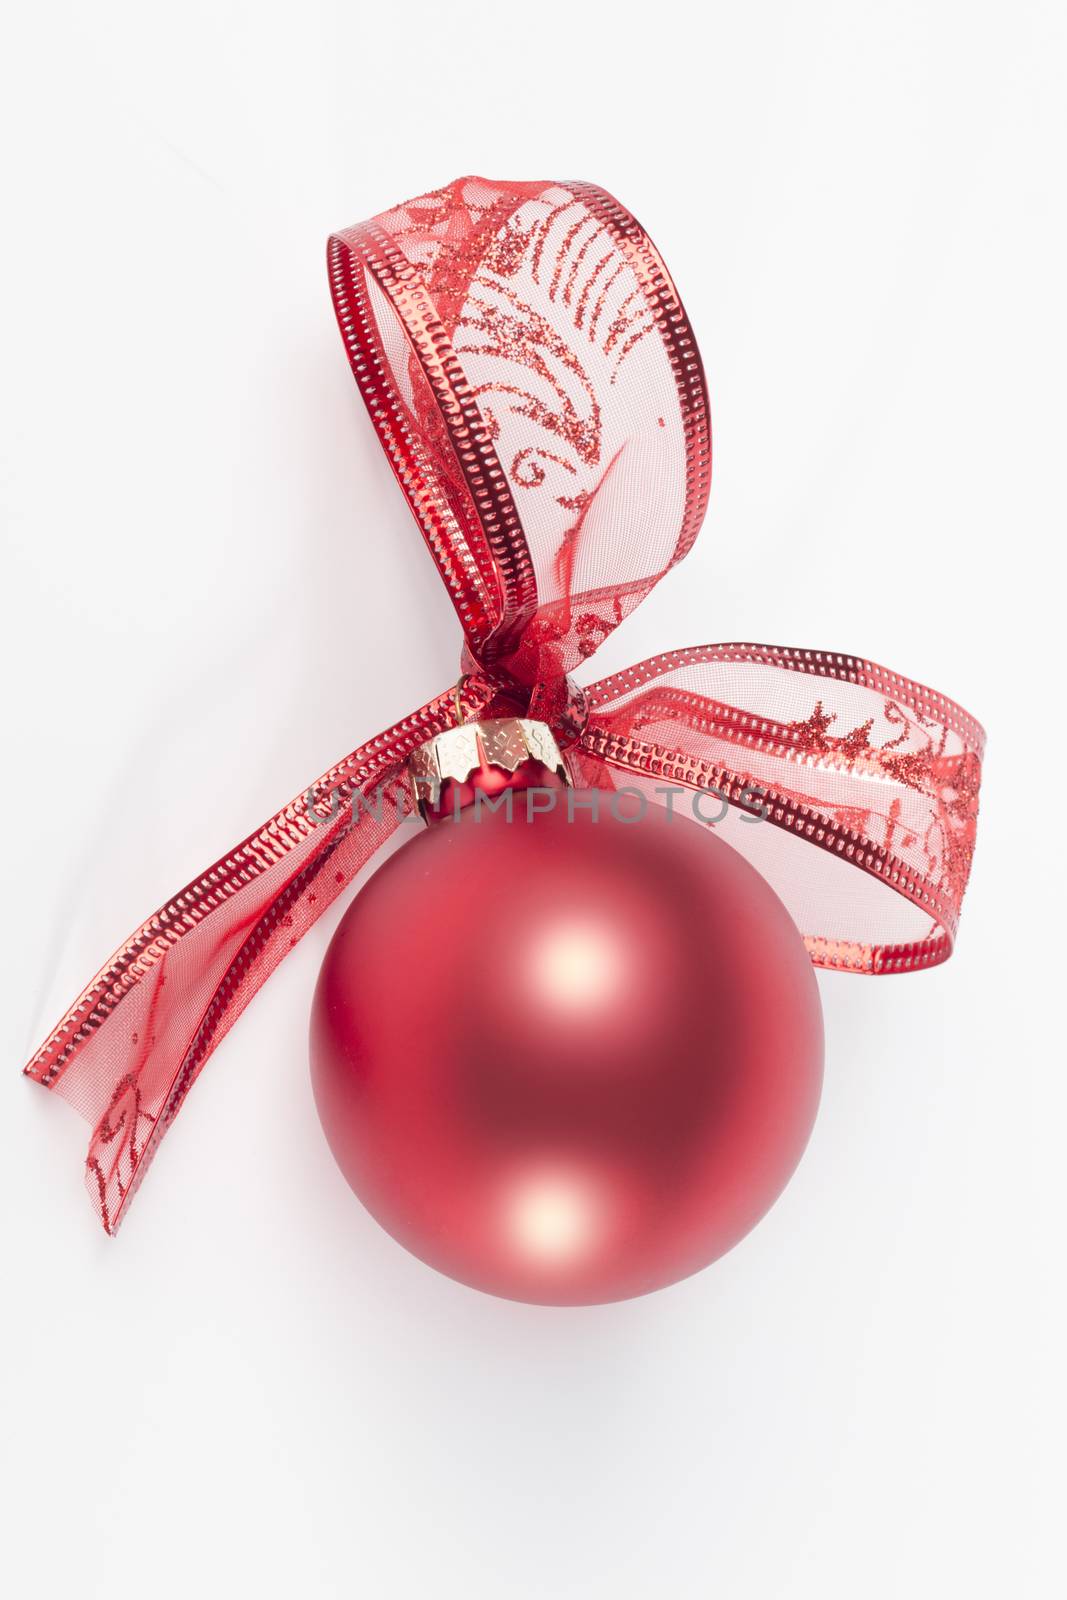 Red christmas ball with ribbon bow, isolated on white background by avanheertum